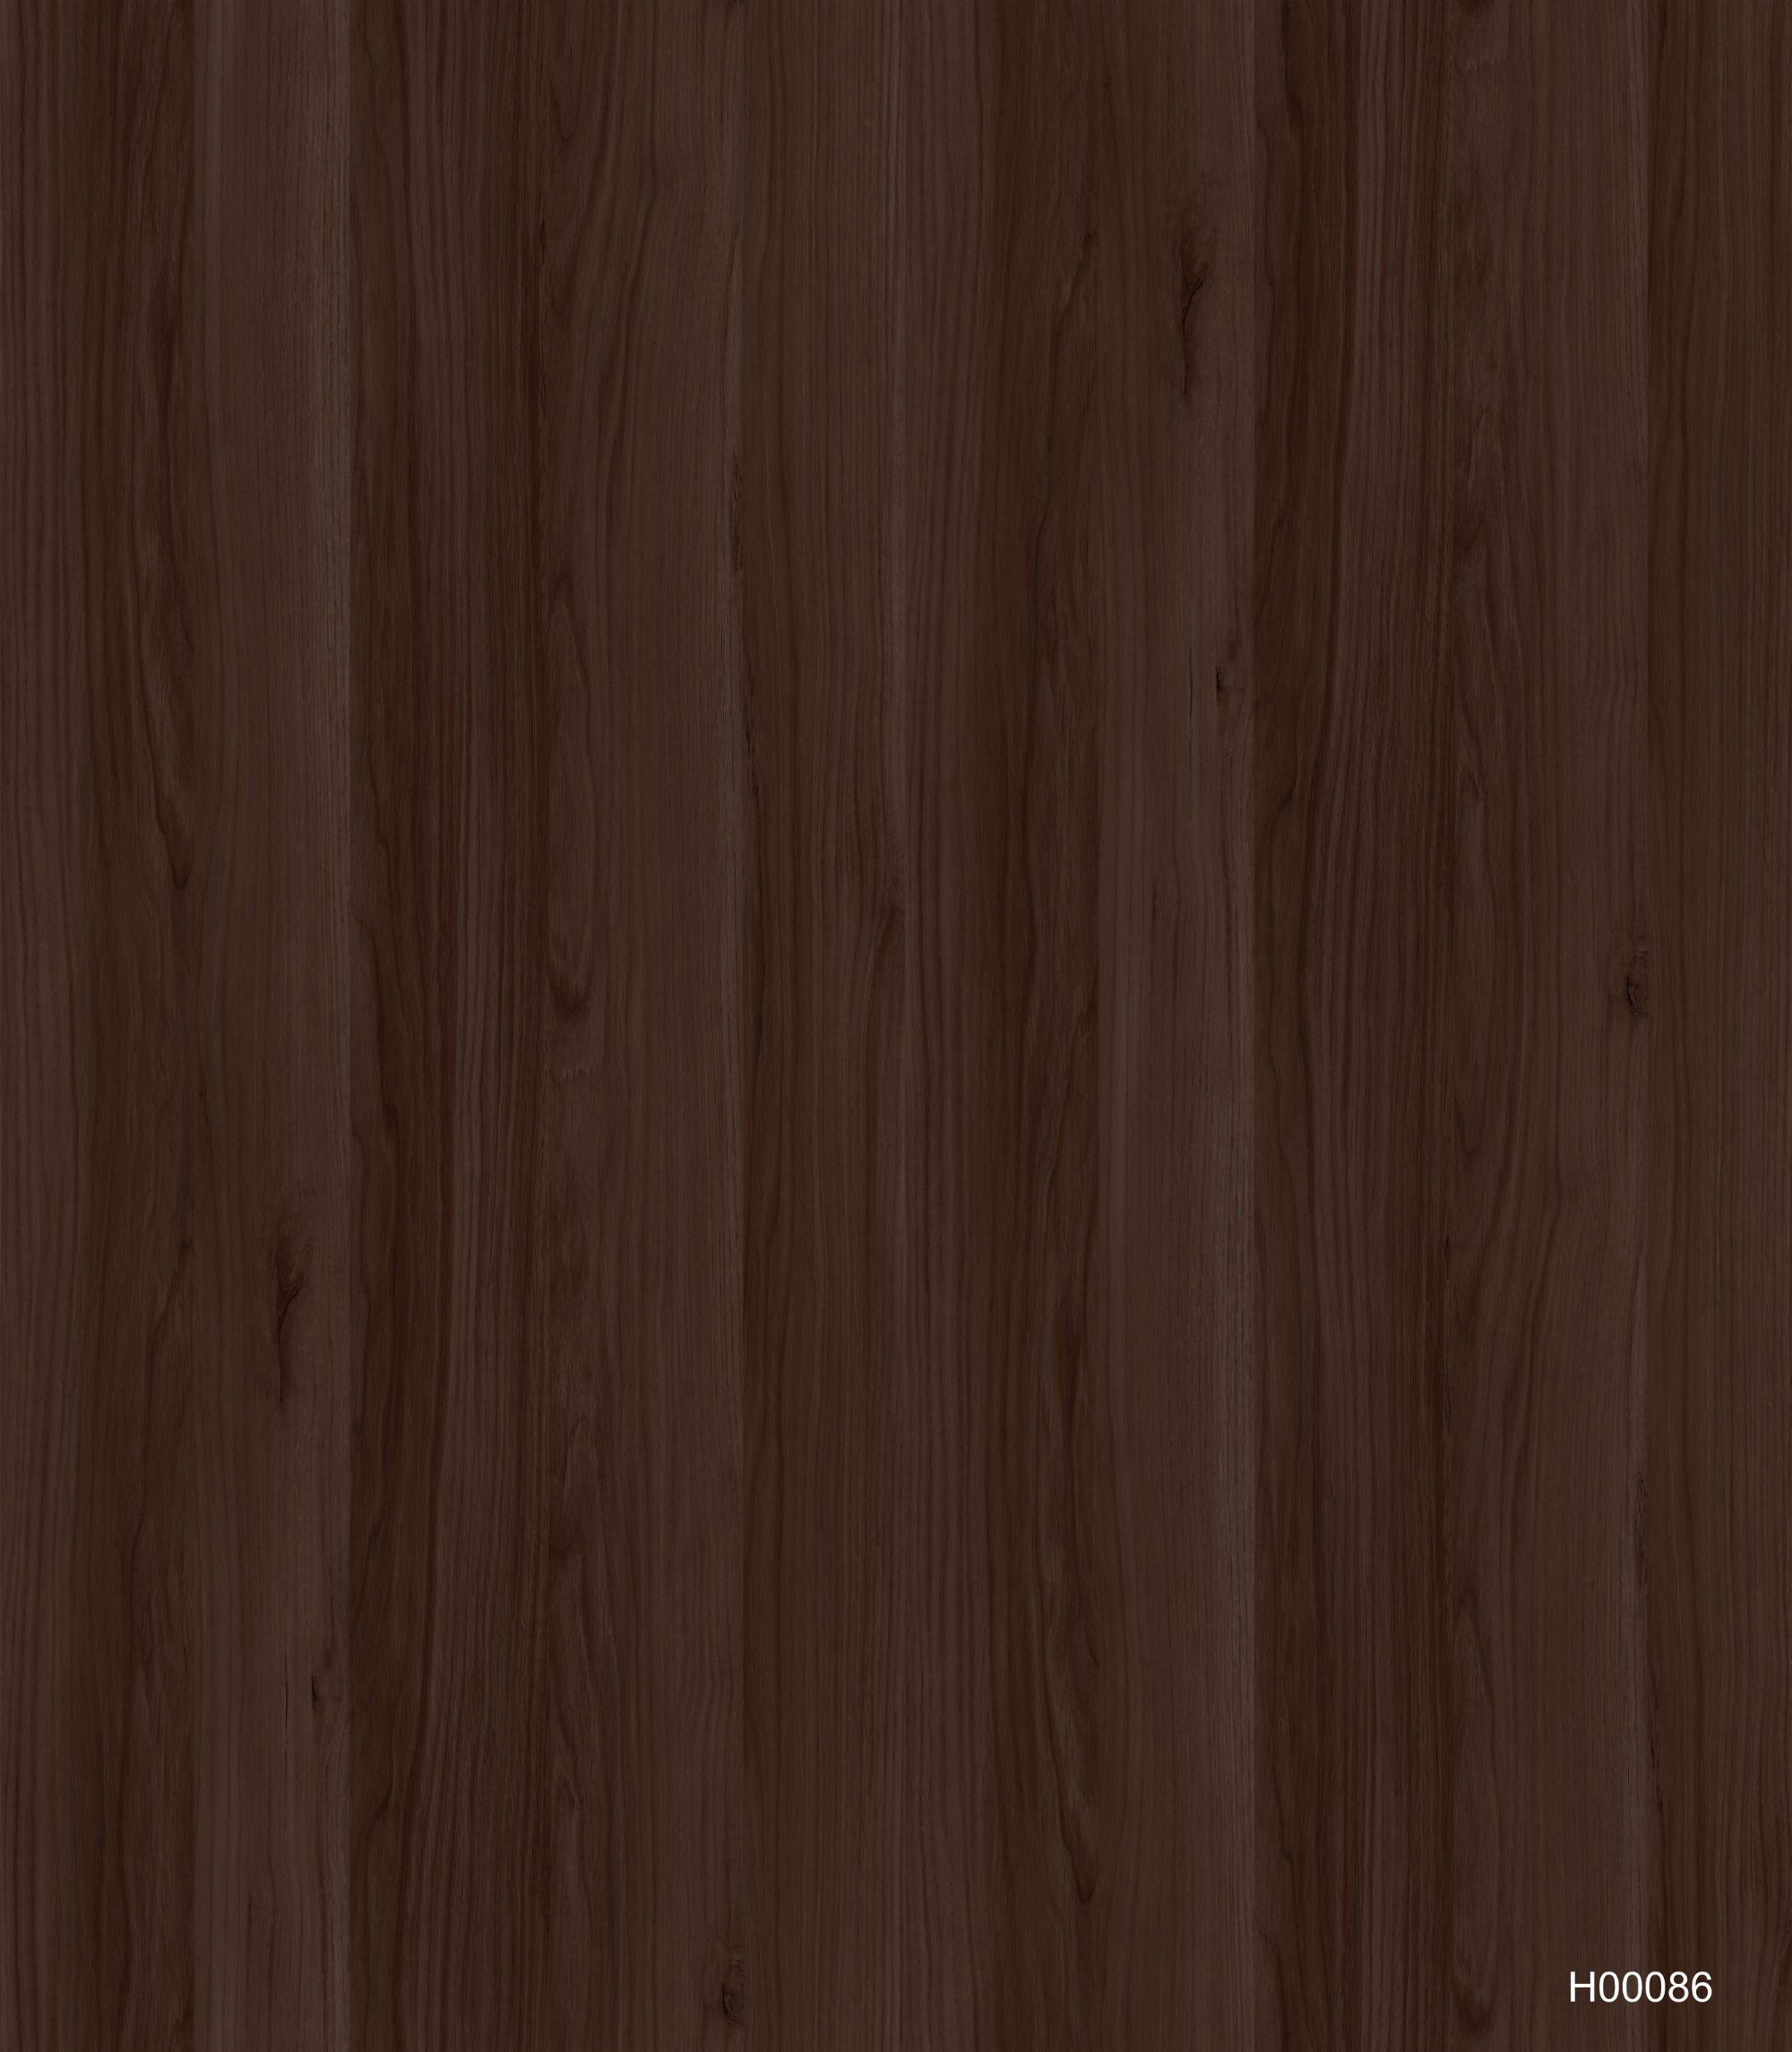 H00086 Melamine paper with wood grain